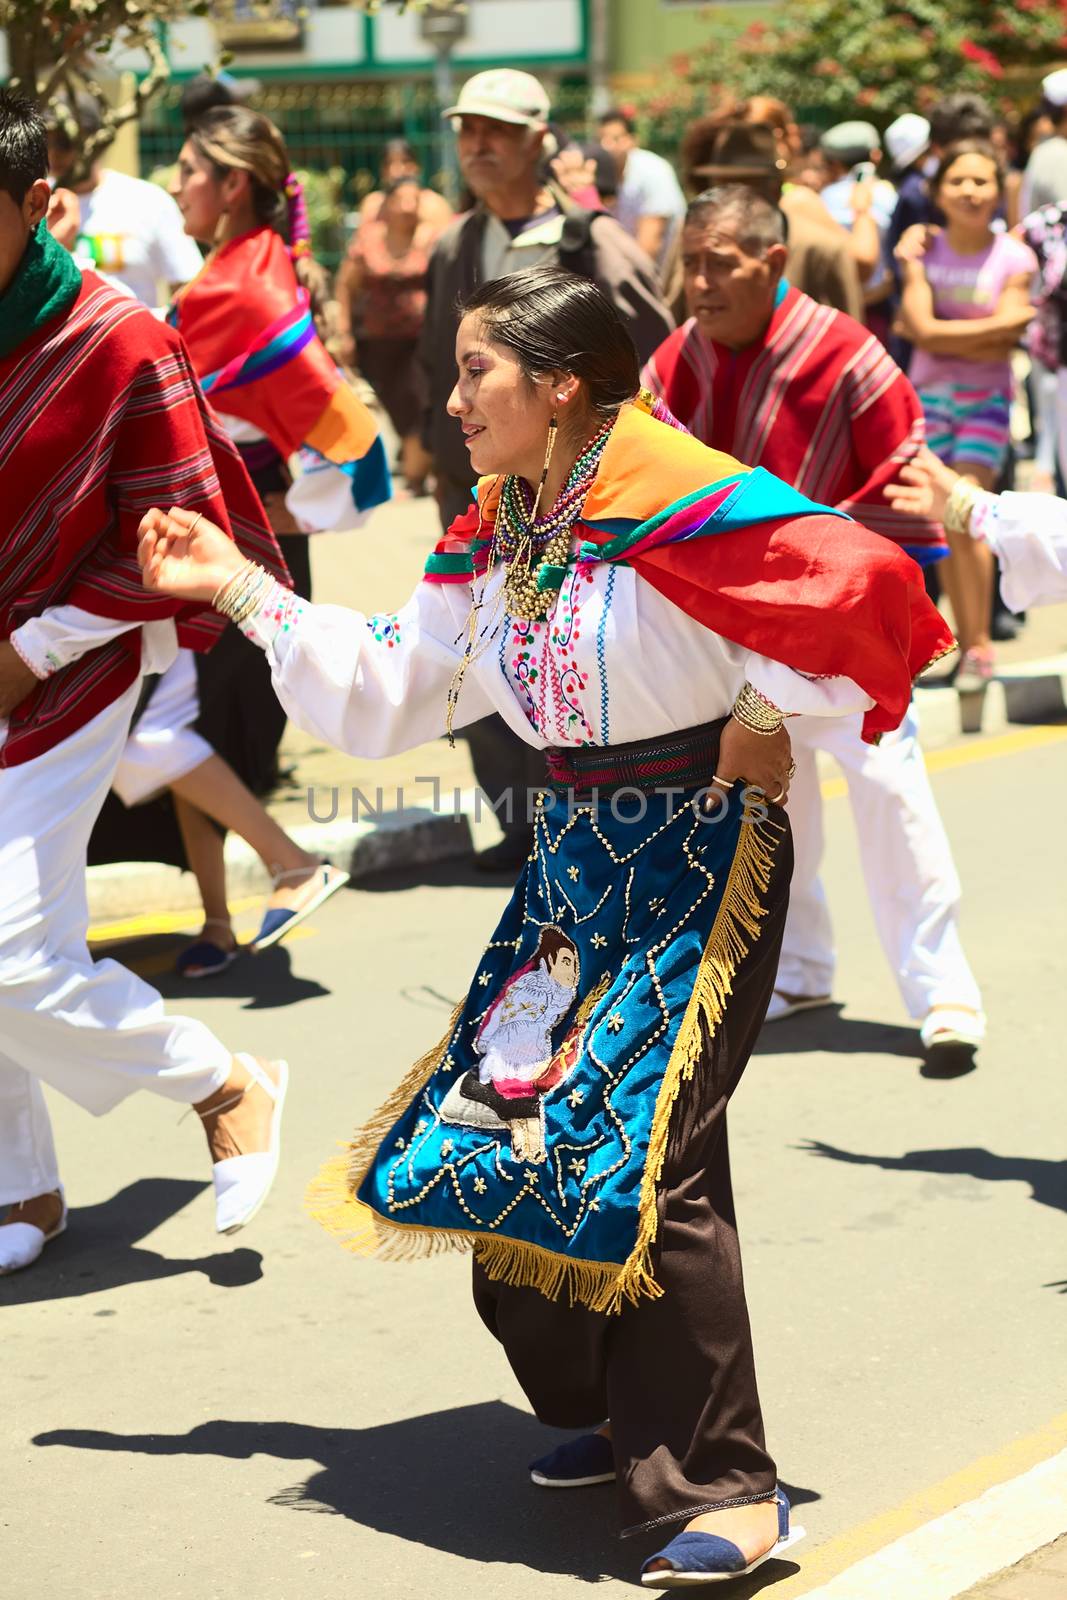 BANOS, ECUADOR - MARCH 2, 2014: Unidentified people dressed in traditional clothes and dancing to music on the carnival parade on Maldonado street on March 2, 2014 in Banos, Ecuador.